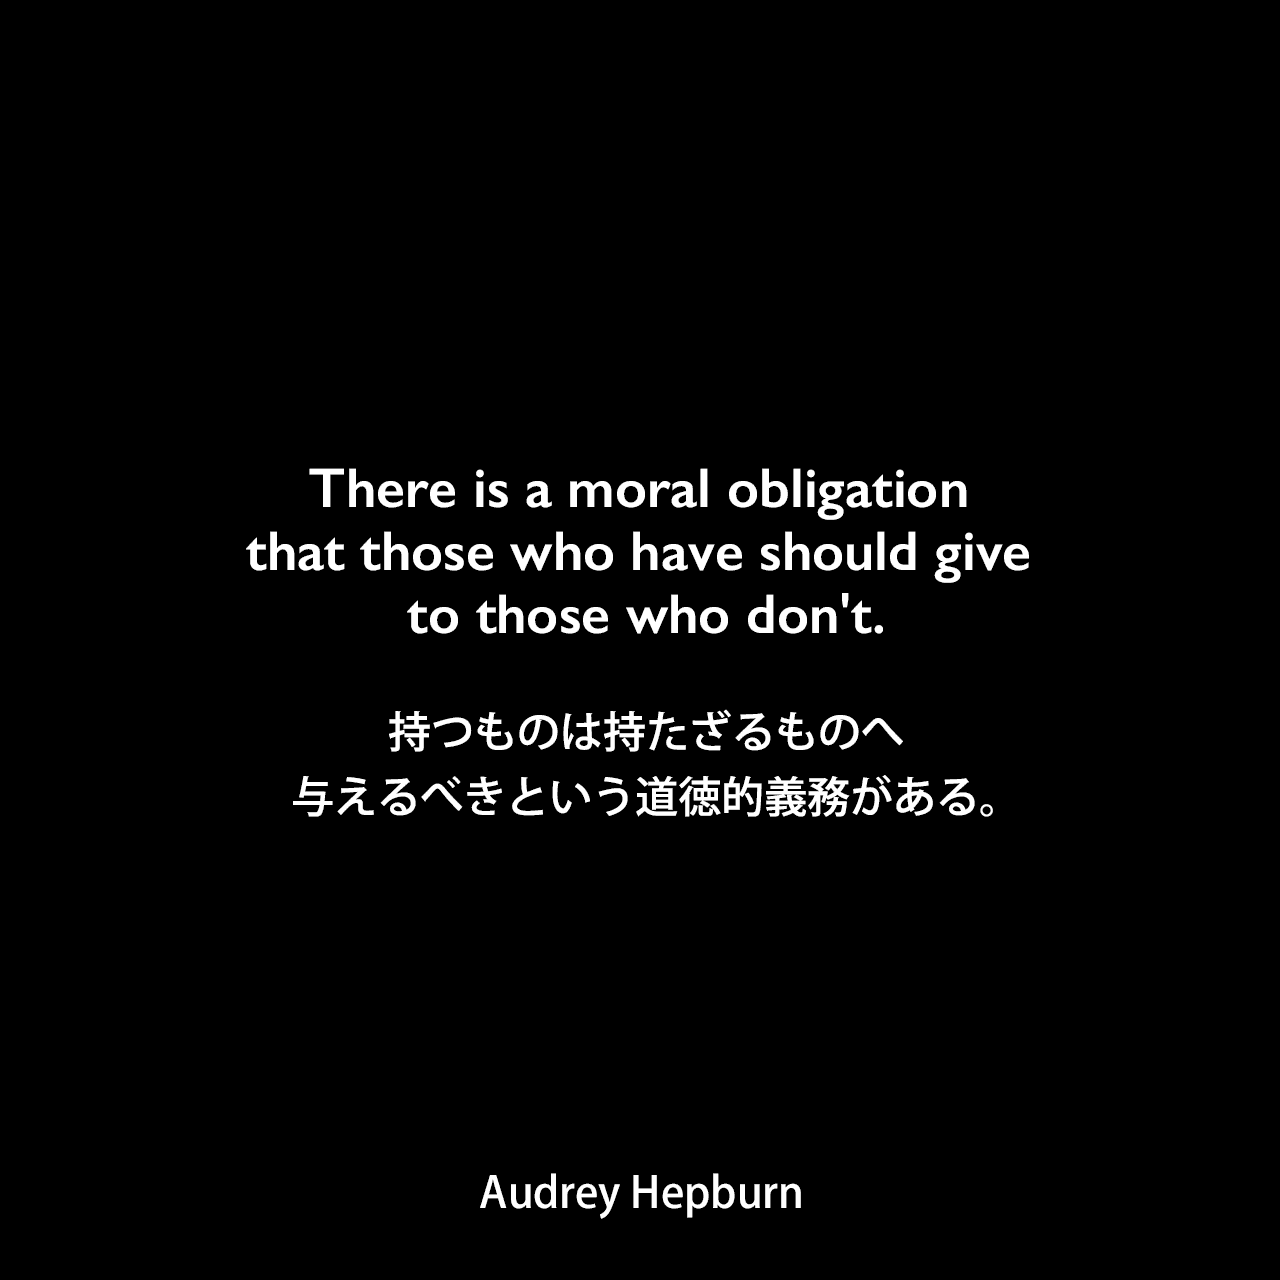 There is a moral obligation that those who have should give to those who don't.持つものは持たざるものへ与えるべきという道徳的義務がある。Audrey Hepburn